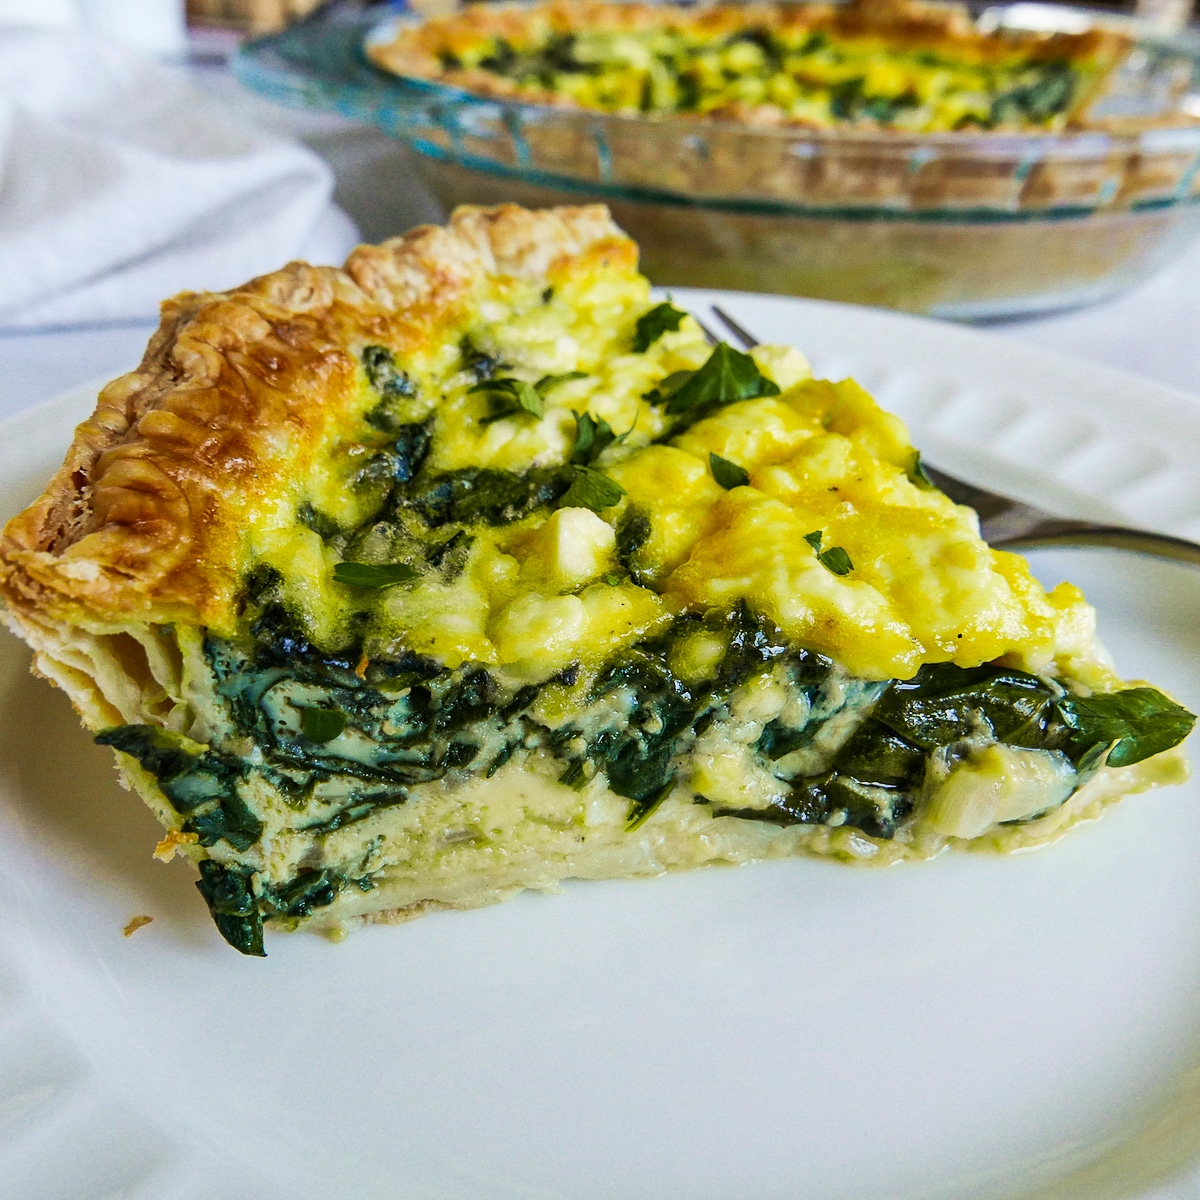 Slice of vegetable quiche arranged on a white plate.